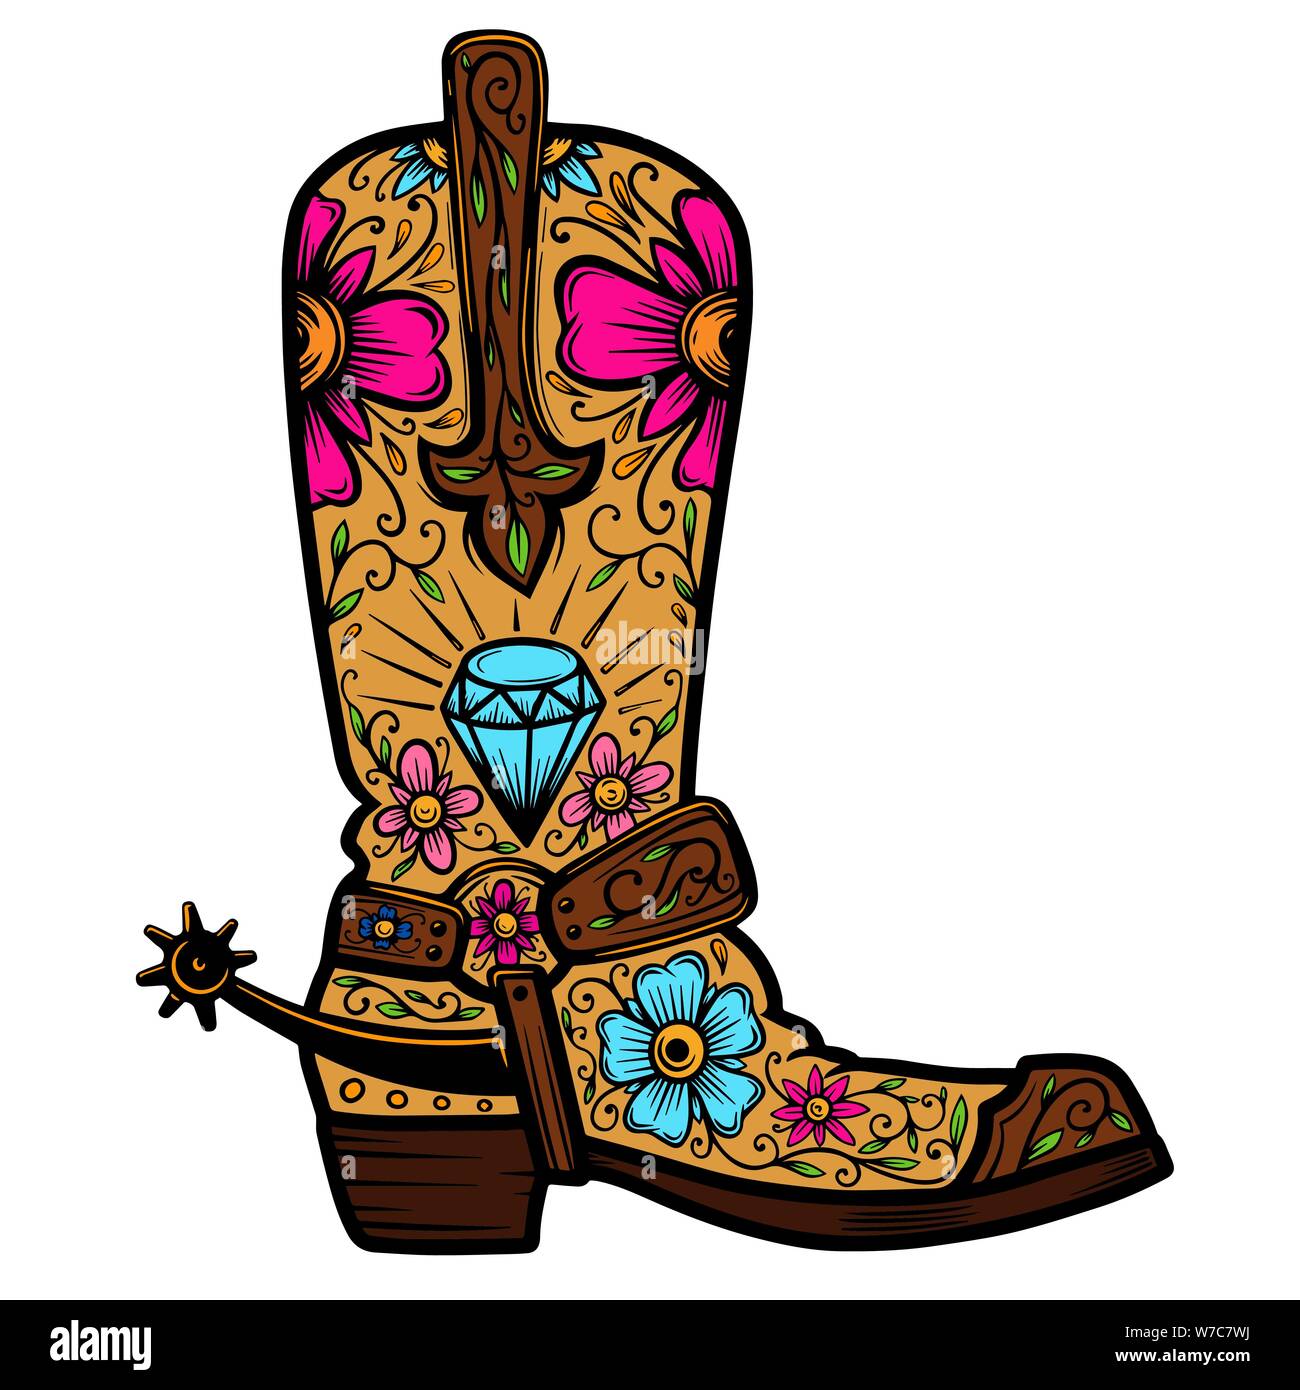 Cowboy boot with floral pattern.  Design element for poster, t shirt, emblem, sign. Stock Vector